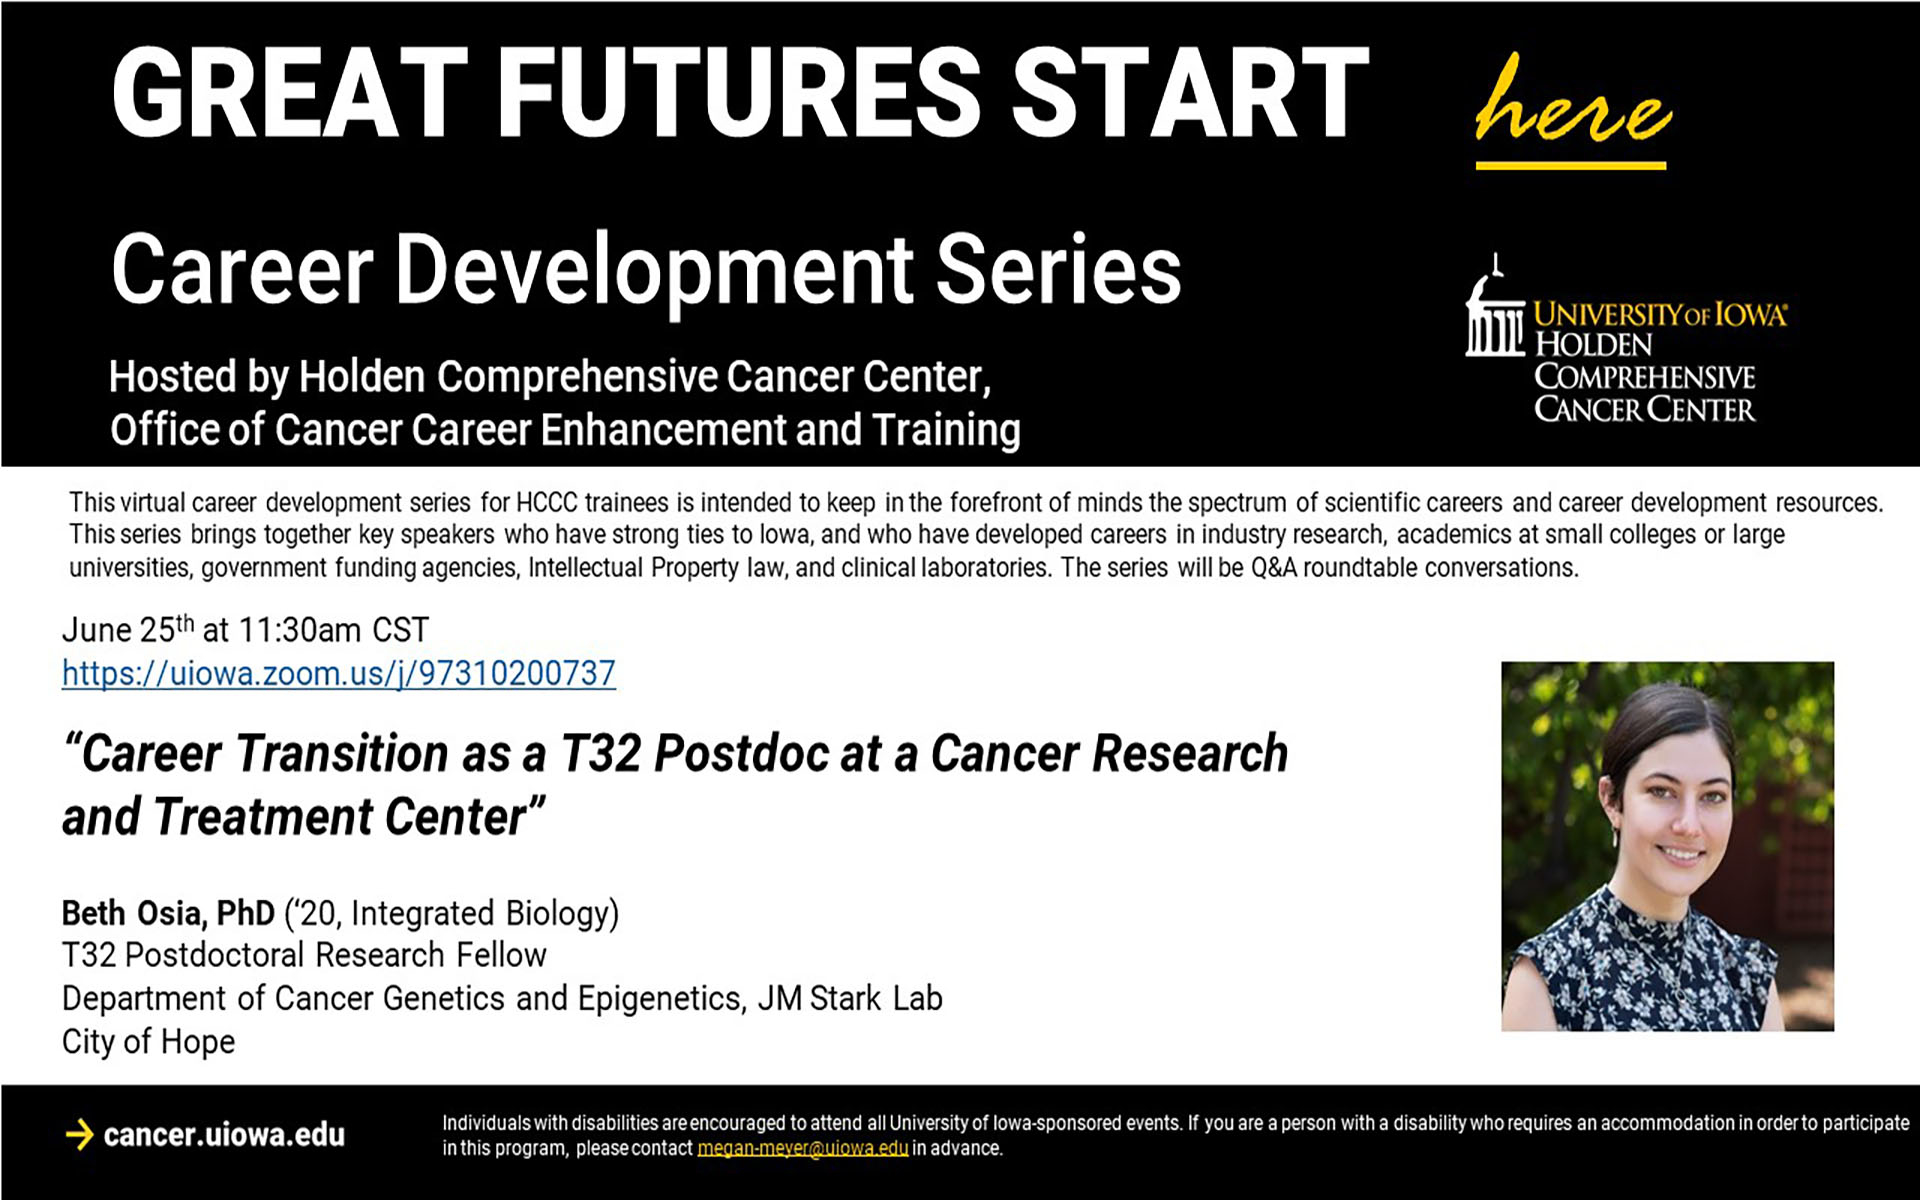 Holden Comprehensive Cancer Center Career Development Series with Beth Osia on June 25 at 11:30am CST via Zoom